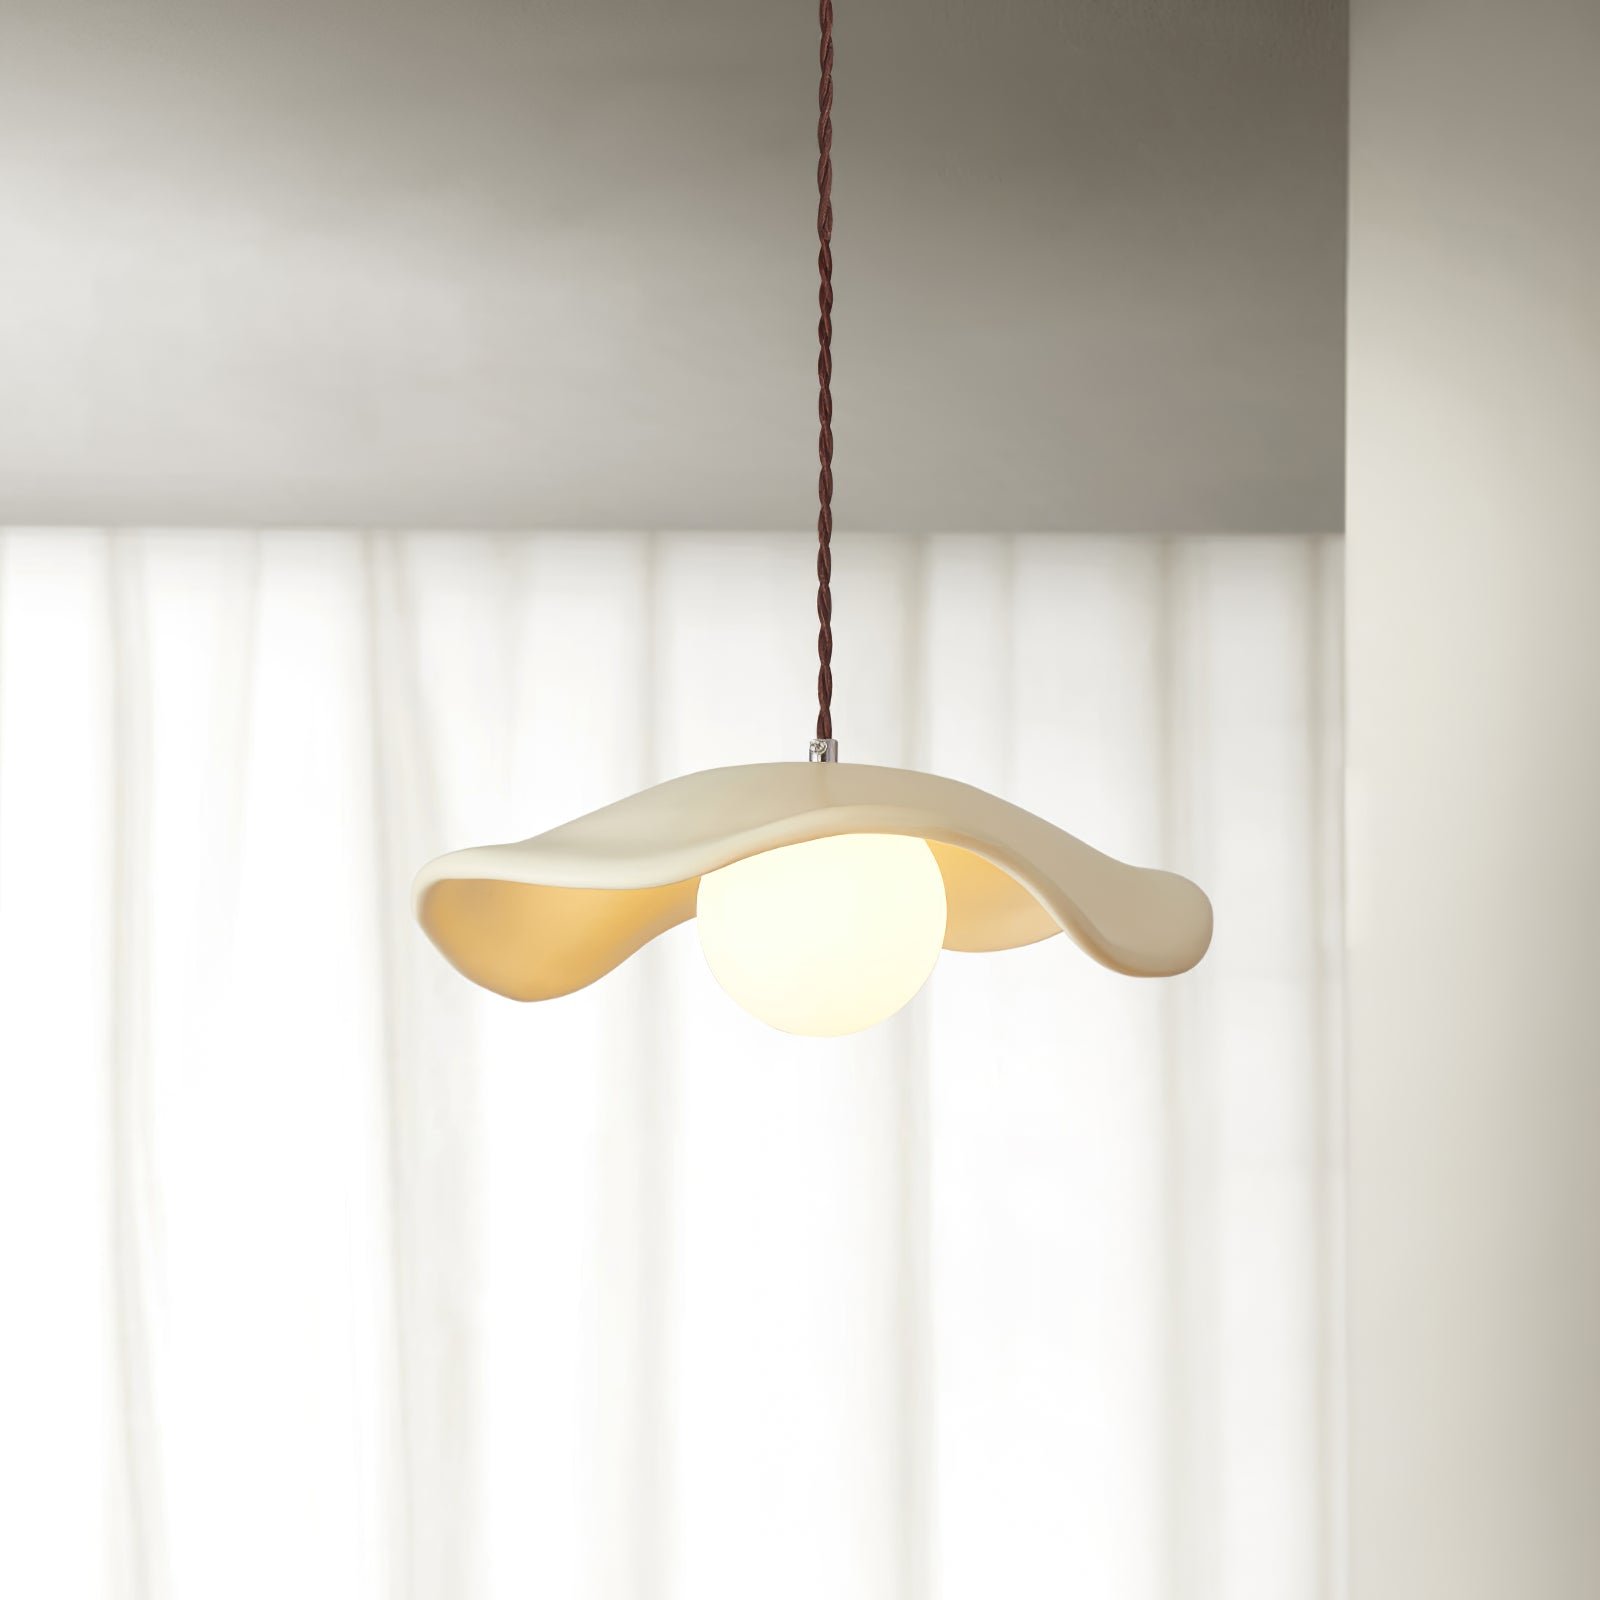 Pendant Lamp - White Hats Design, with a diameter of roughly 13.7 inches and a height of 3.9 inches (35cm x 10cm).